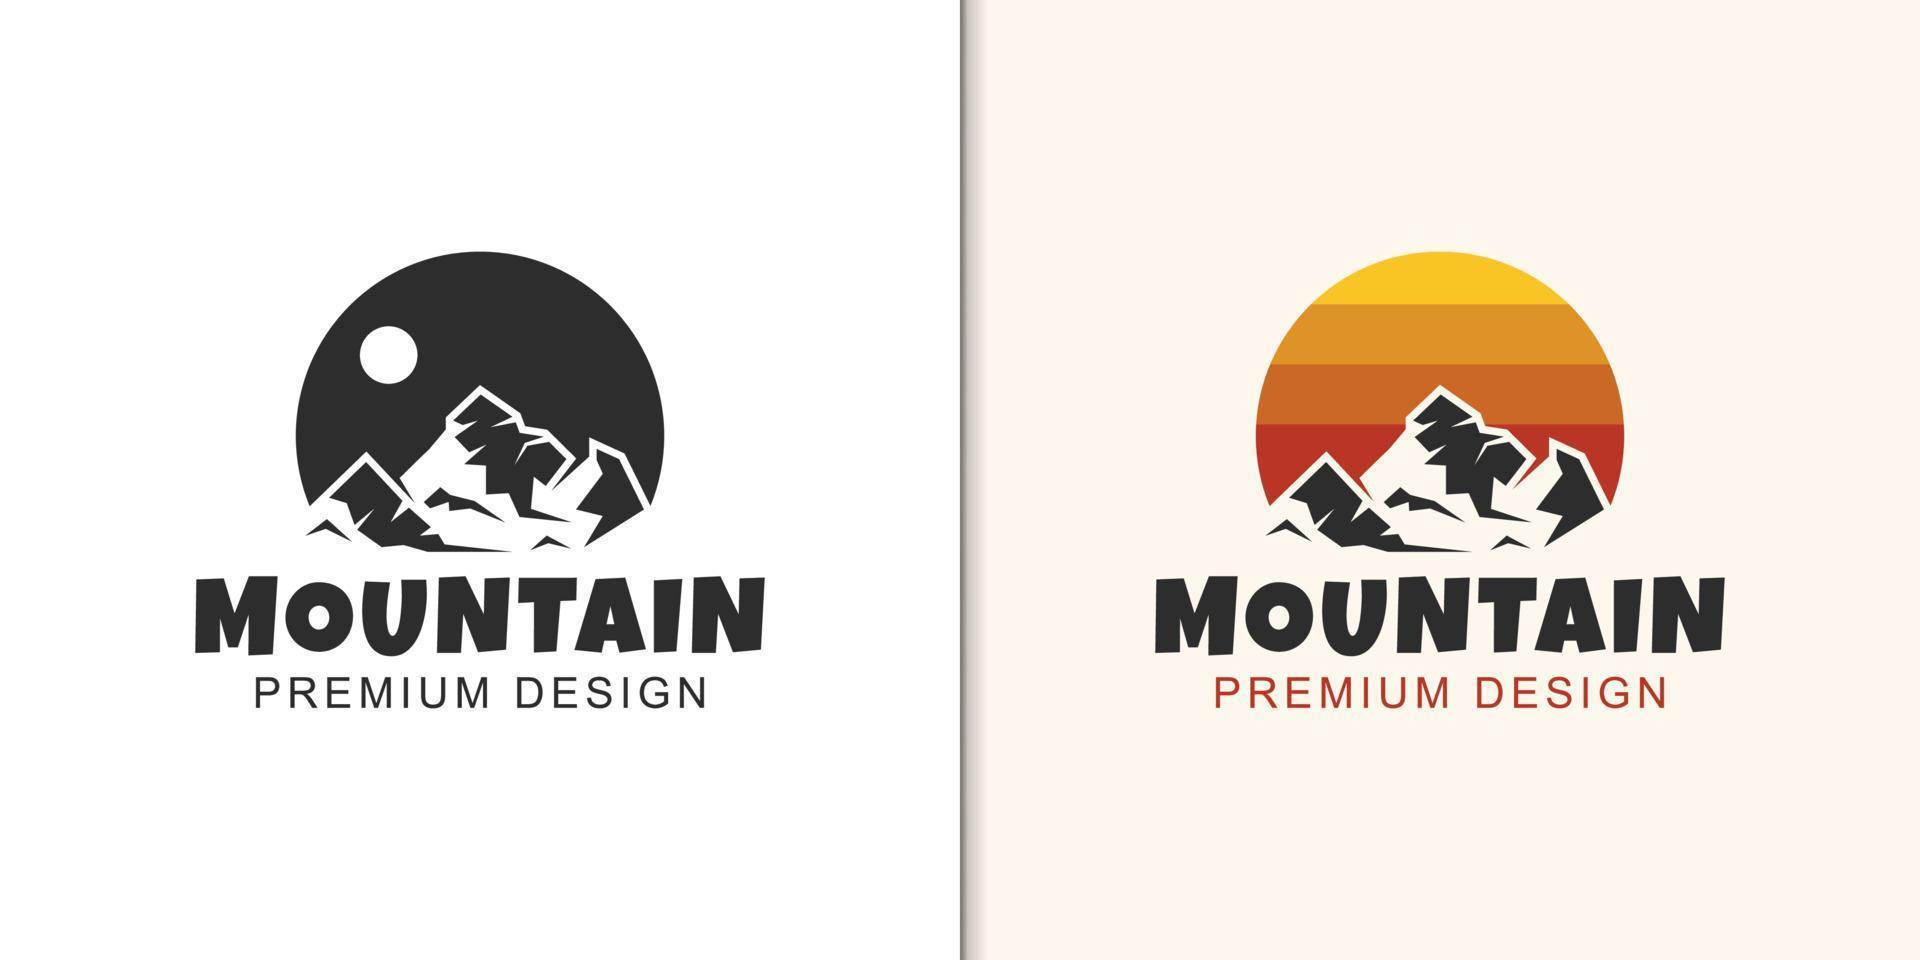 rock mountain landscape with sun logo design for isolated, adventure outdoor, travel hiking logo vector